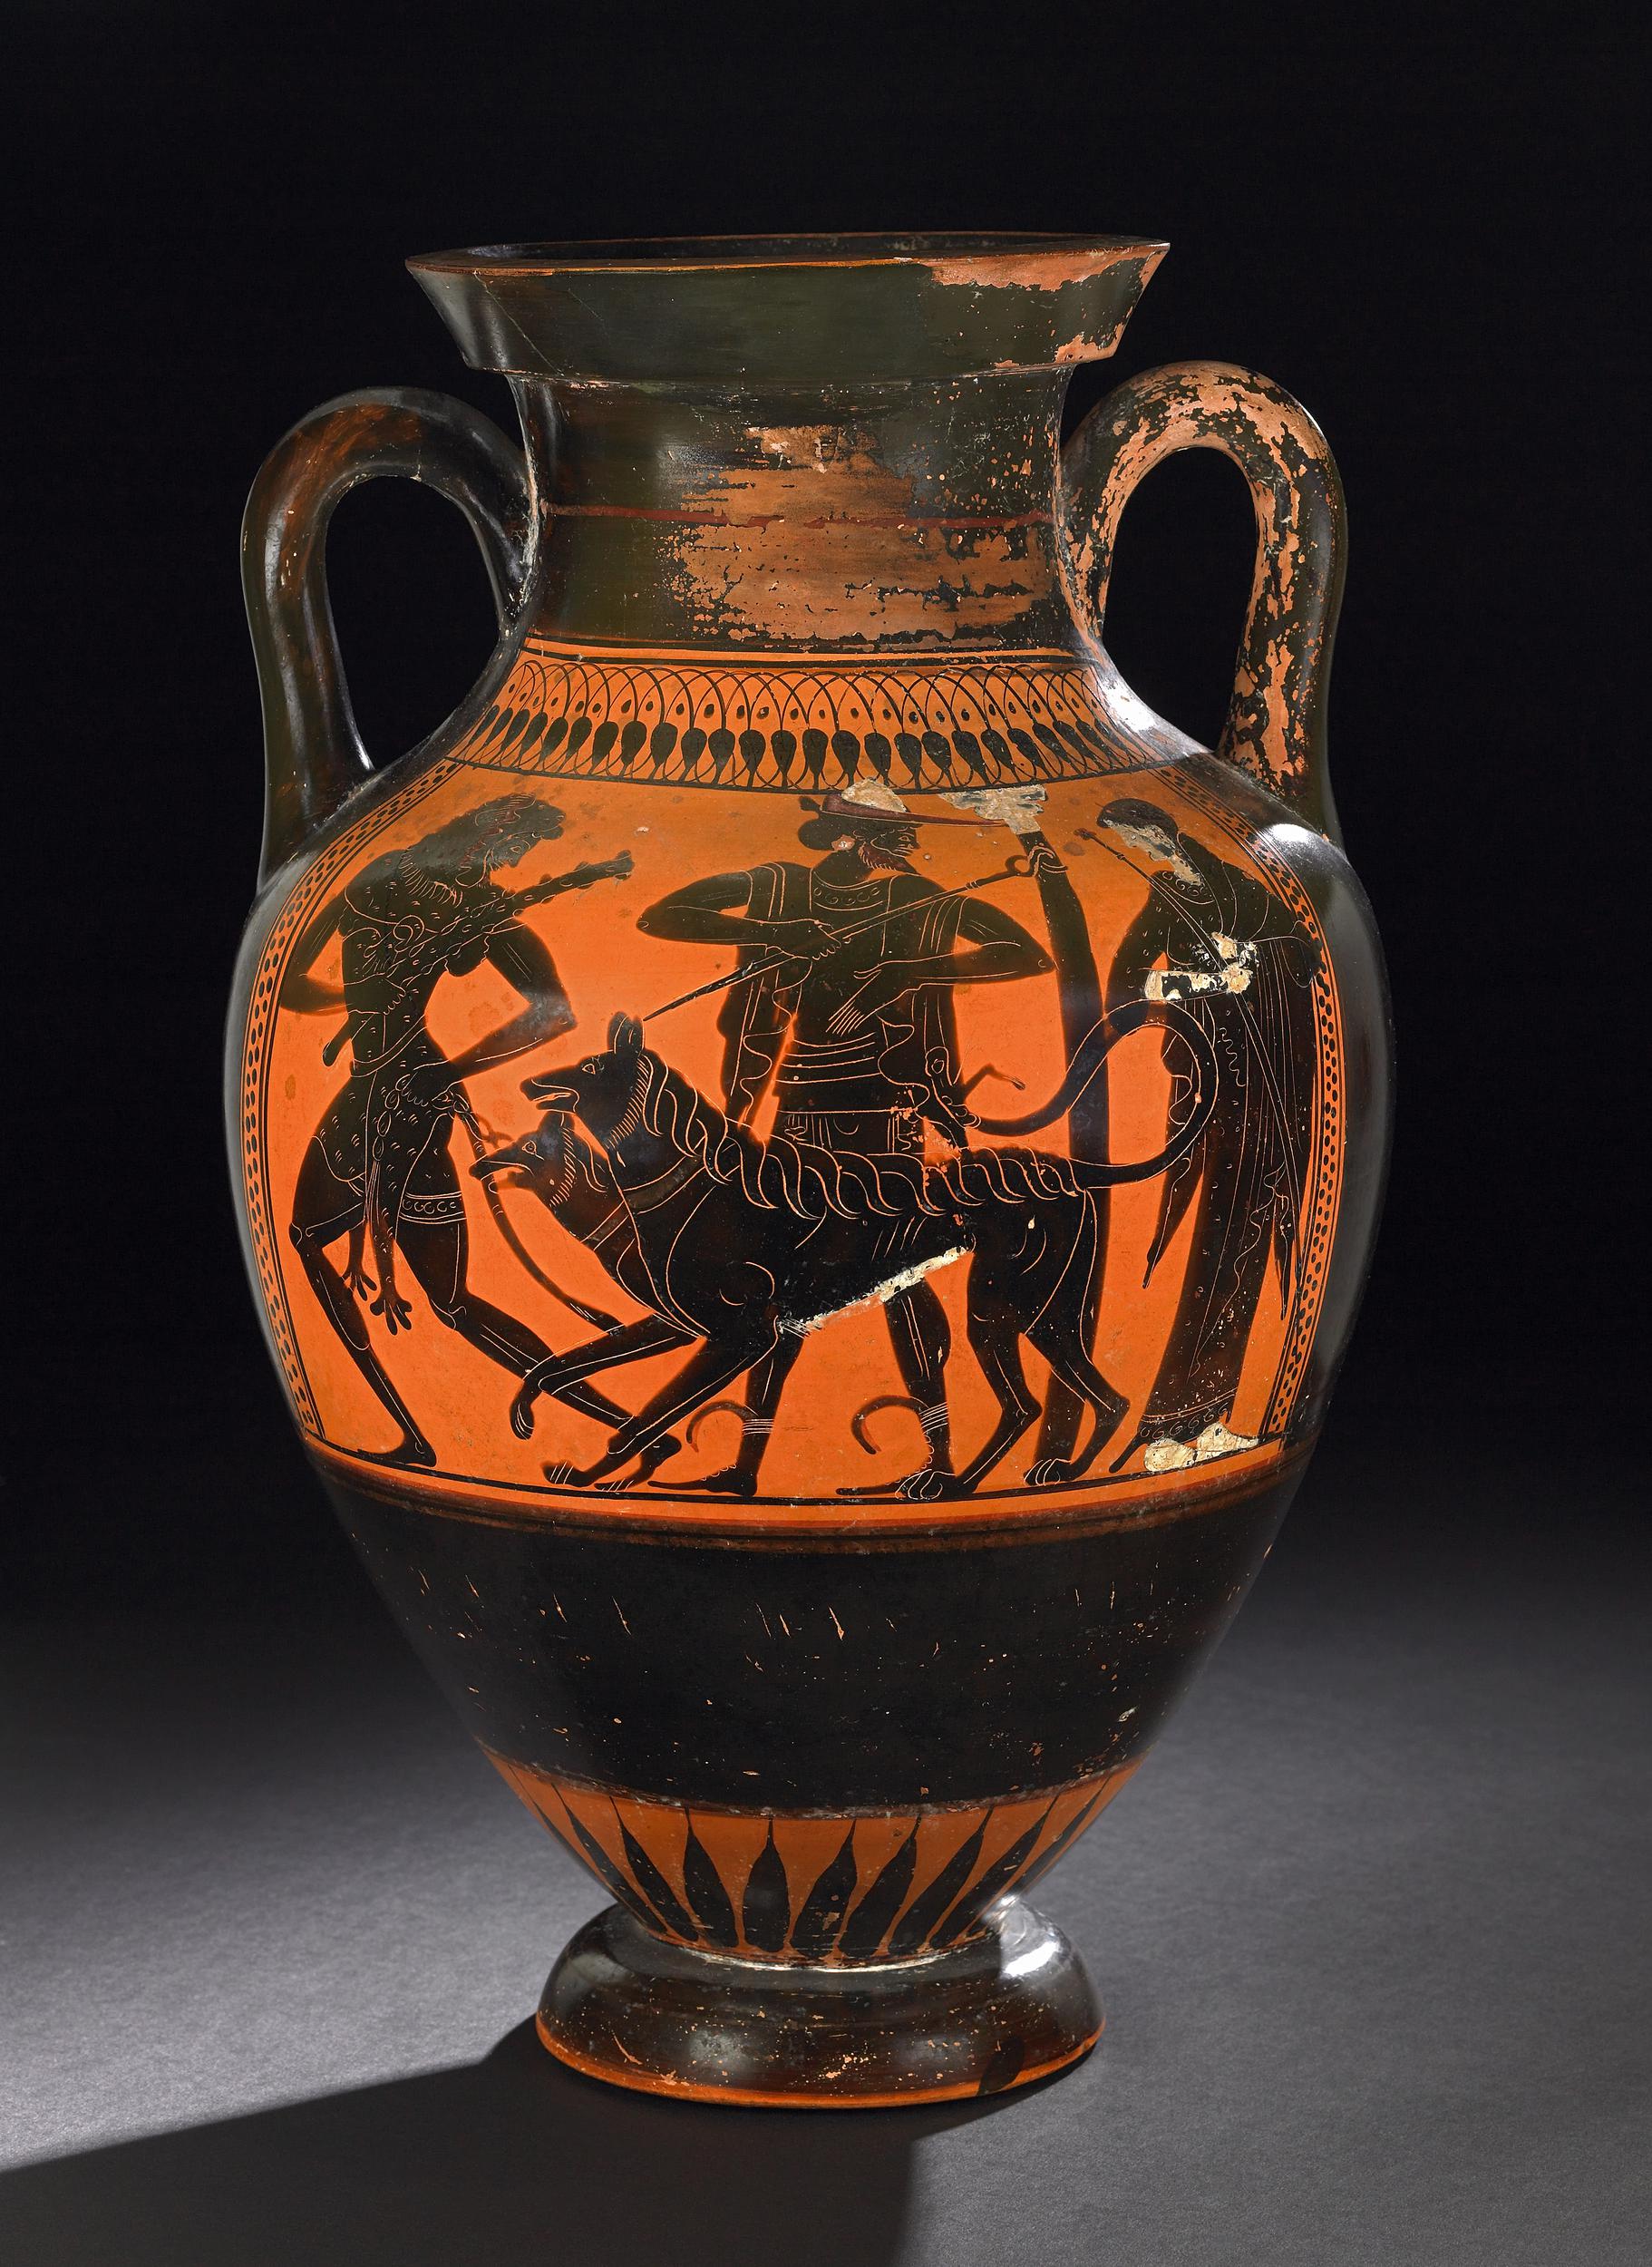 Heracles, carrying a club and wearing his lion skin, leads the three-headed dog Cerberus on a leash. Hermes, with petasos hat and cadduceus, stands beside Cerberus. Persephone, in decorated robes and holding a sceptre, stands to the right.